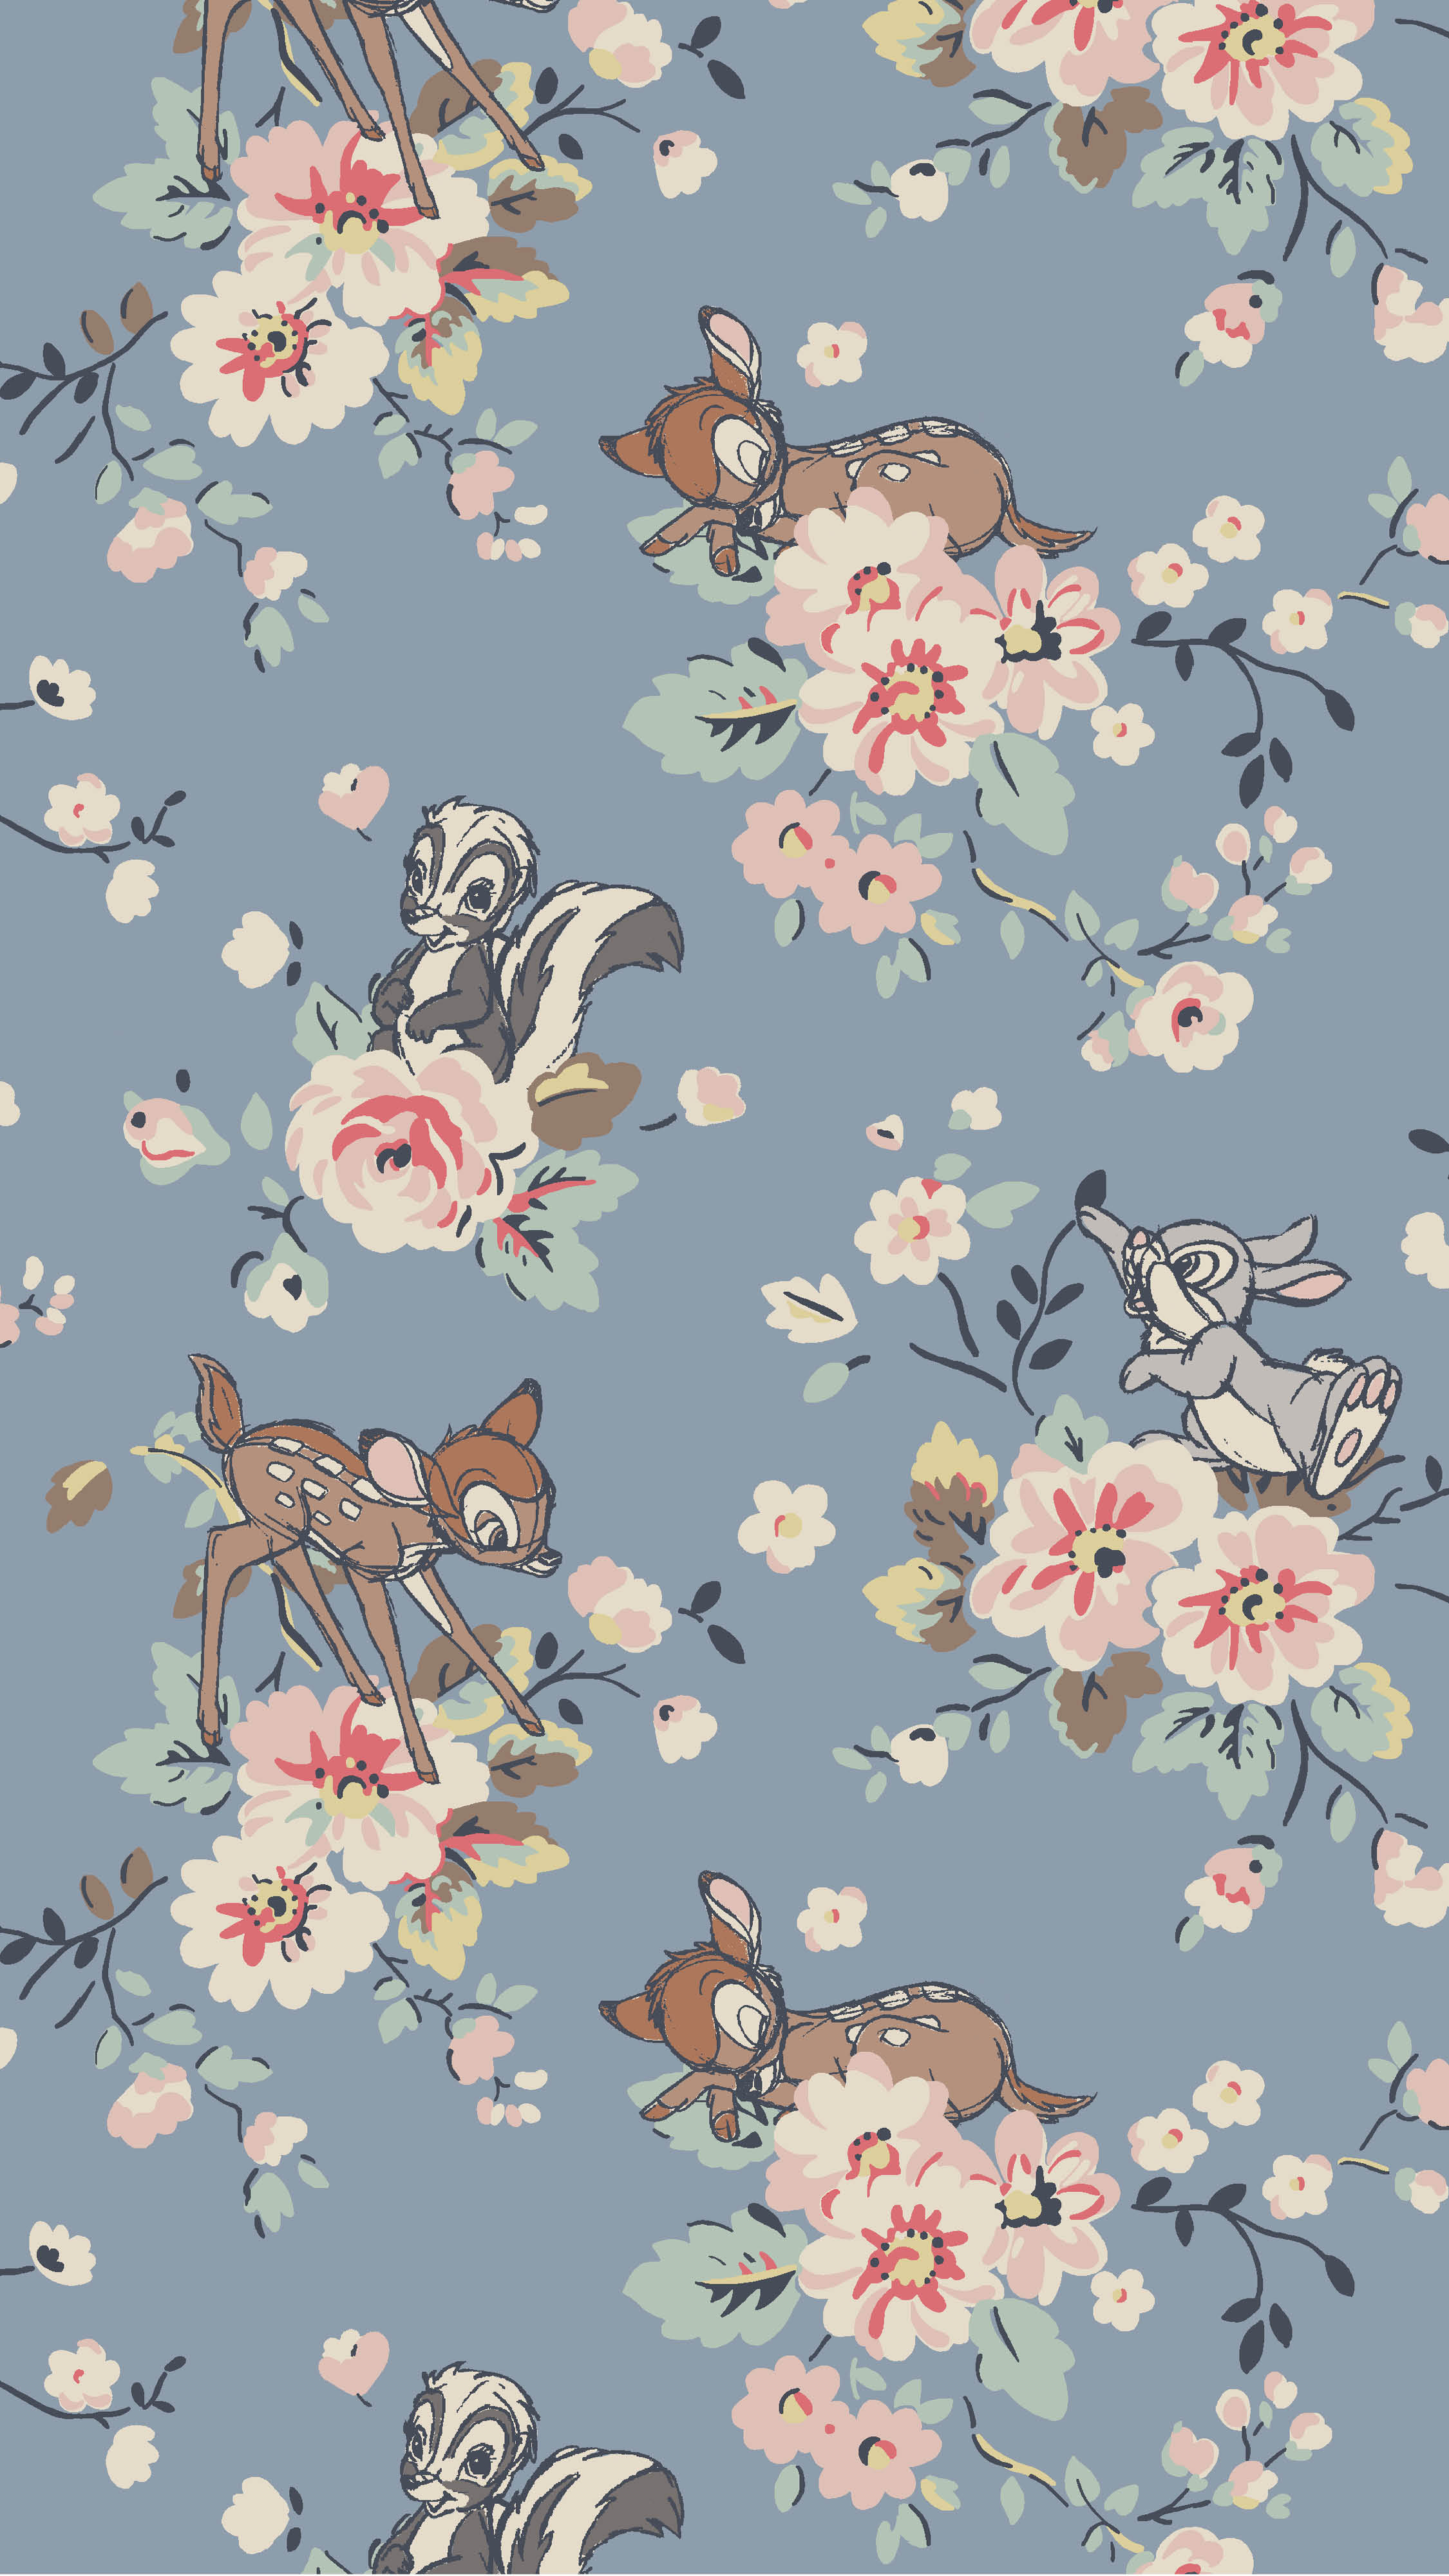 Cath Kidston These Limited Edition Bambi X Cath Kidston Prints? Save The Image For A New Phone Wallpaper! Don't Forget To Sign Up So That You Can Shop The Range